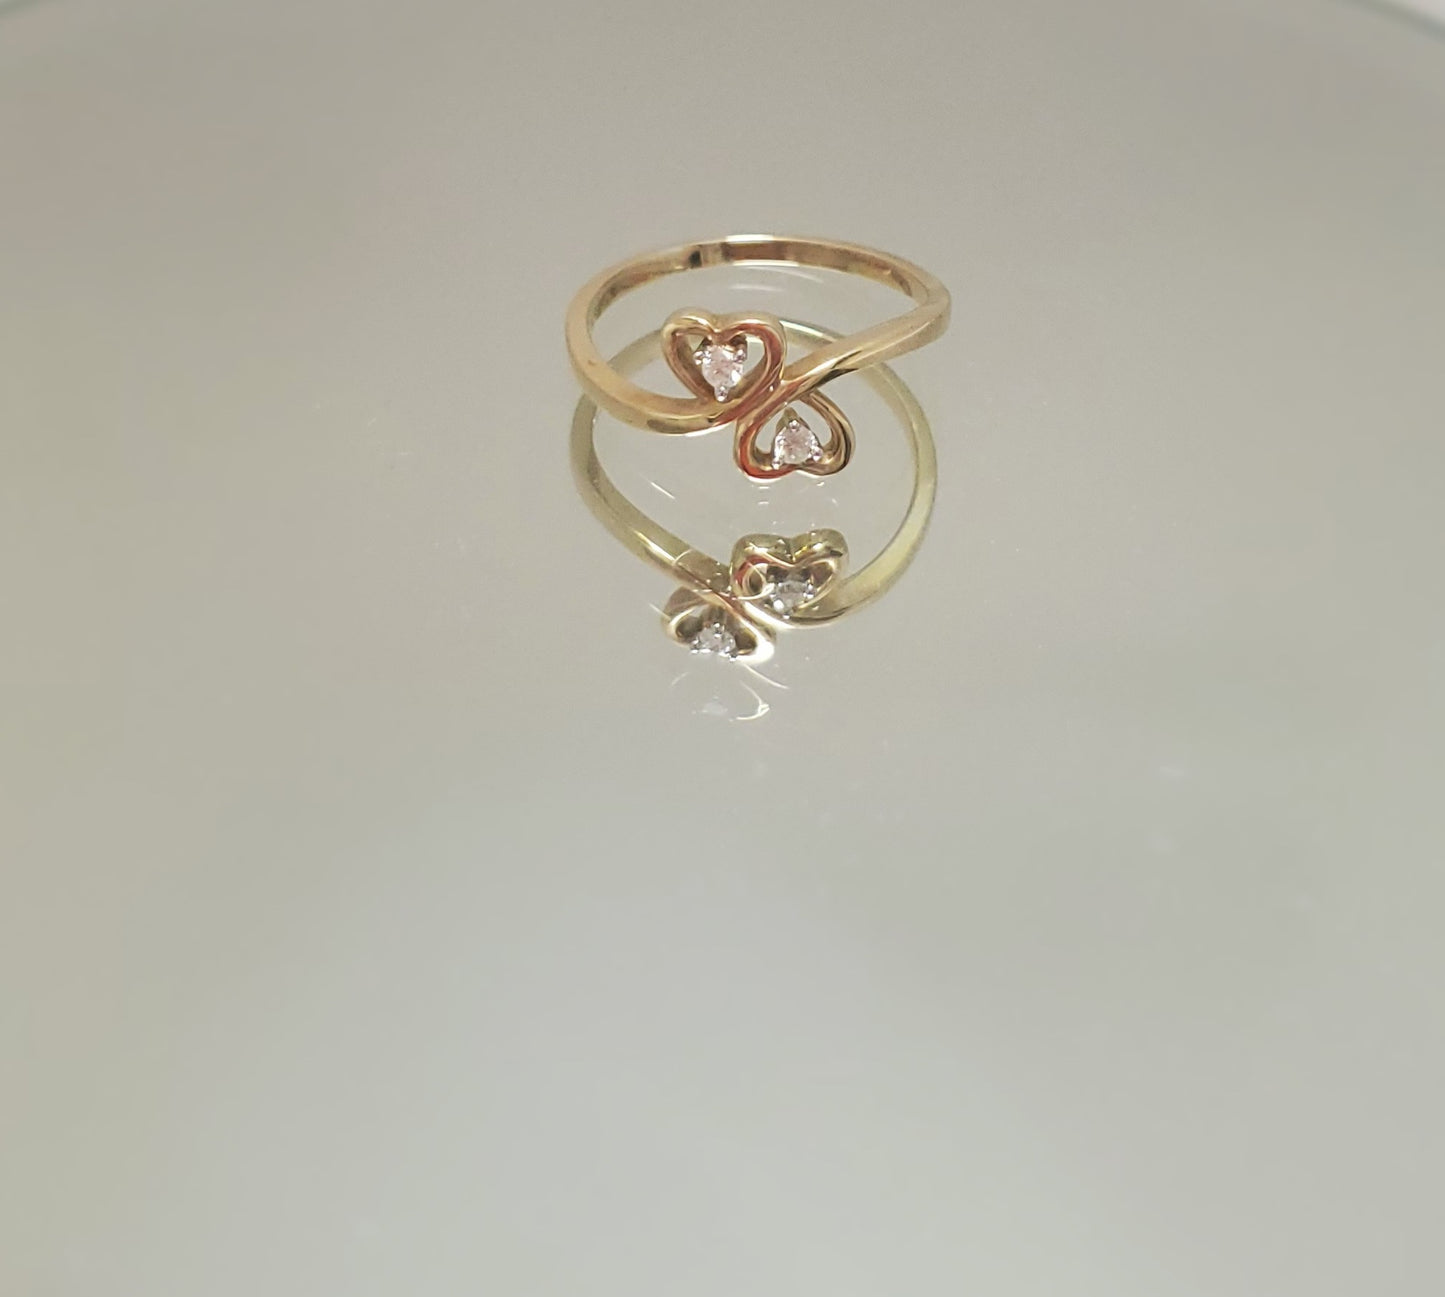 10K Yellow Gold Double Heart Ring